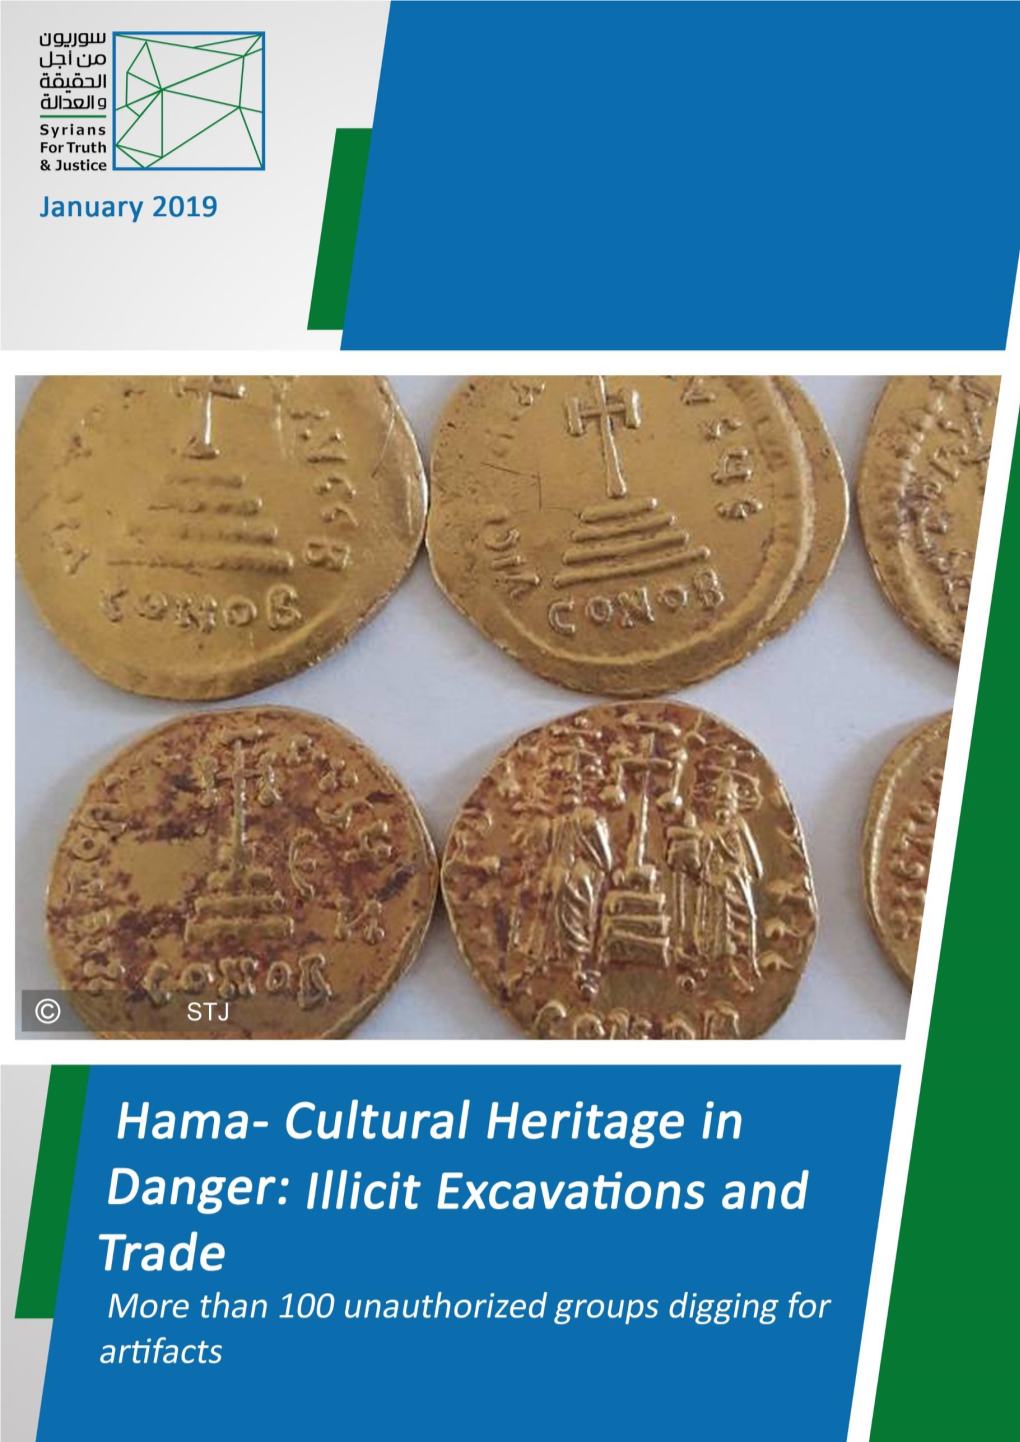 Hama-Cultural Heritage in Danger, Illicit Excavations and Trade.Pdf